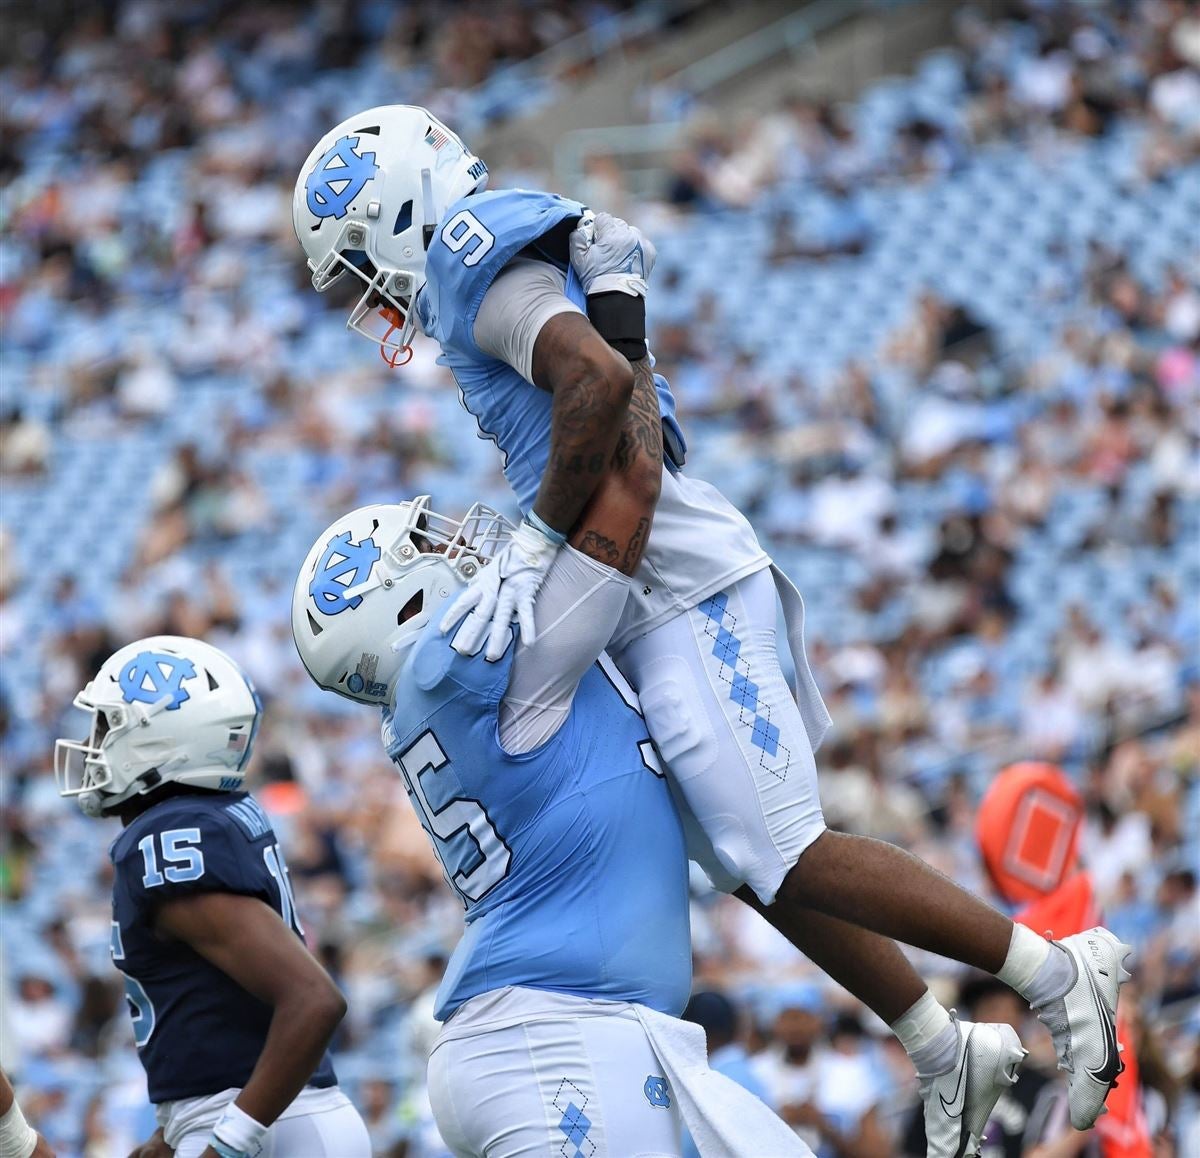 Conner Harrell’s Touchdown Passes Highlight UNC Football's Spring Game